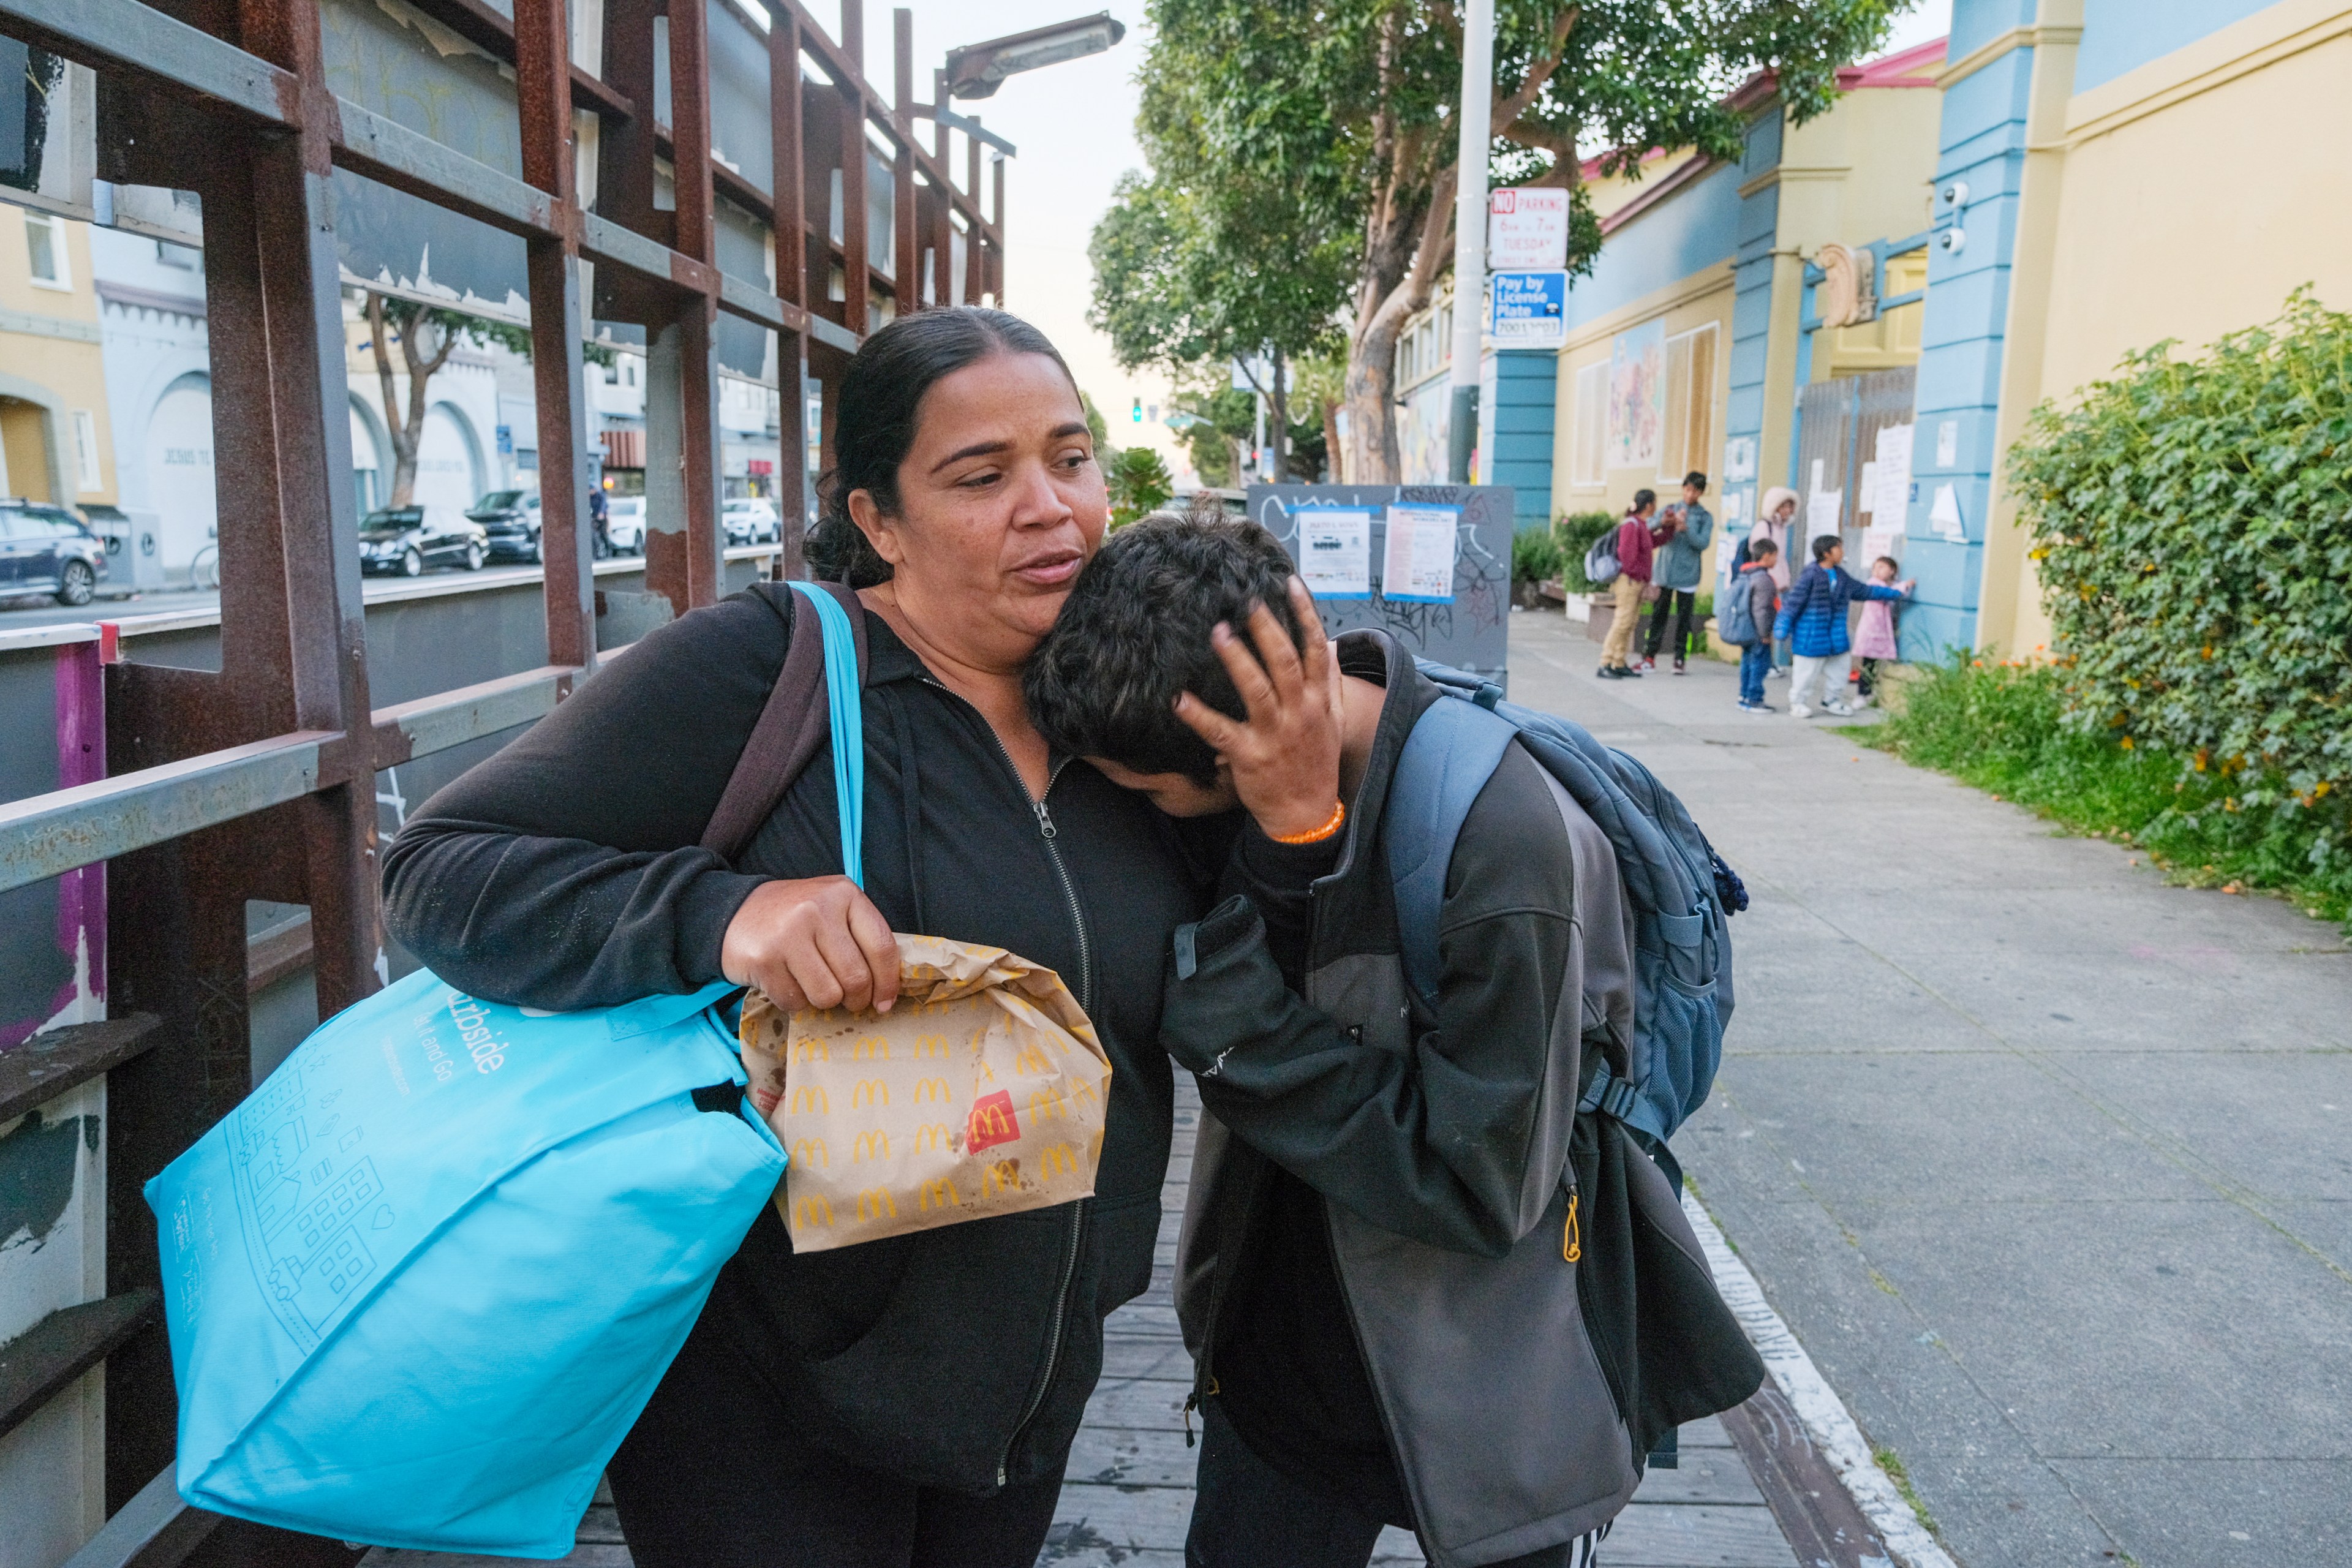 A woman comforts a young person on a sidewalk; both seem distressed, with a fast-food bag in view.